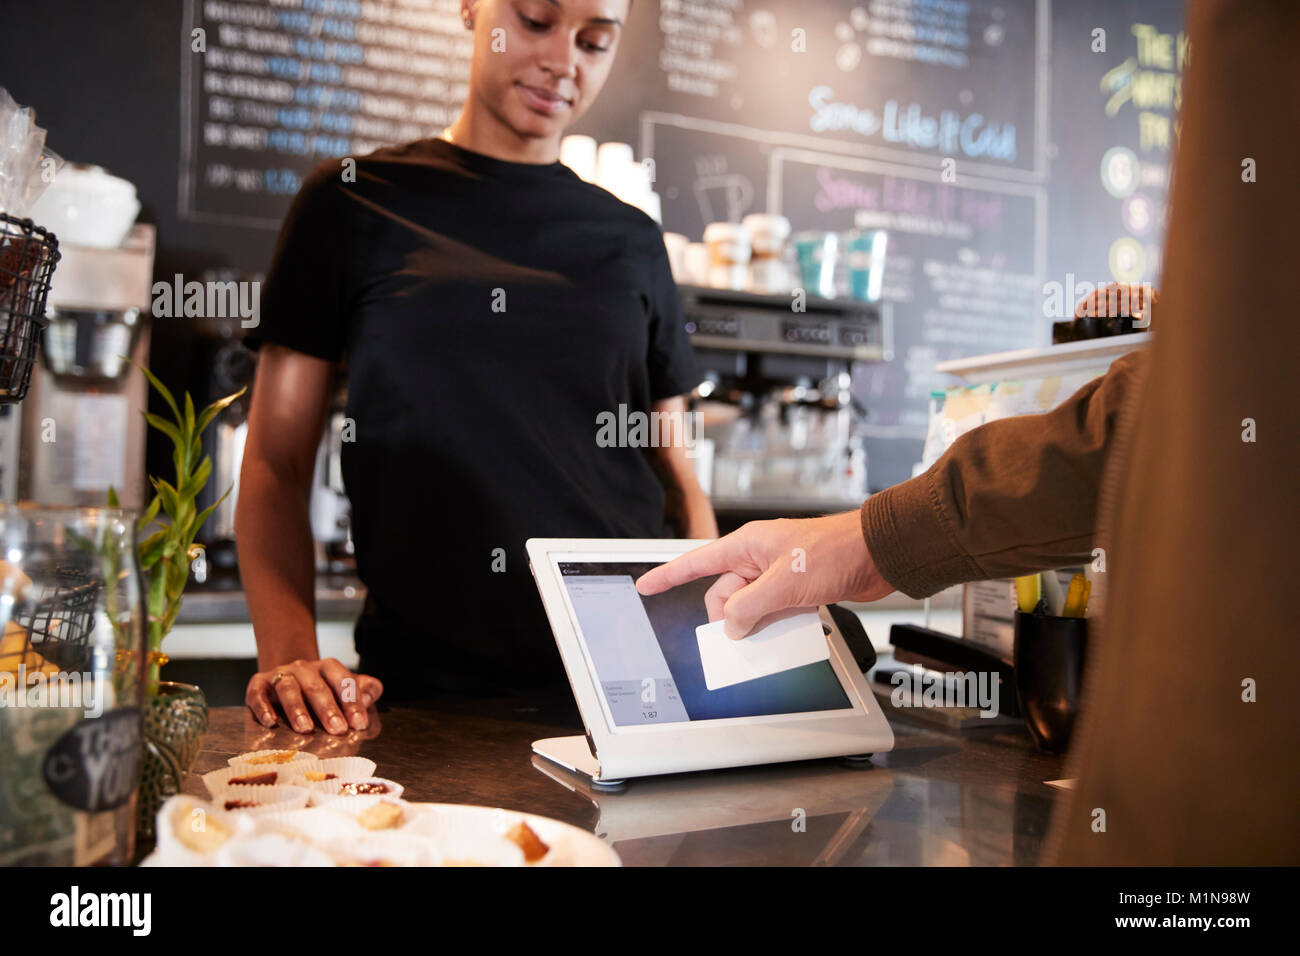 Customer Paying In Coffee Shop Using Credit Card Stock Photo